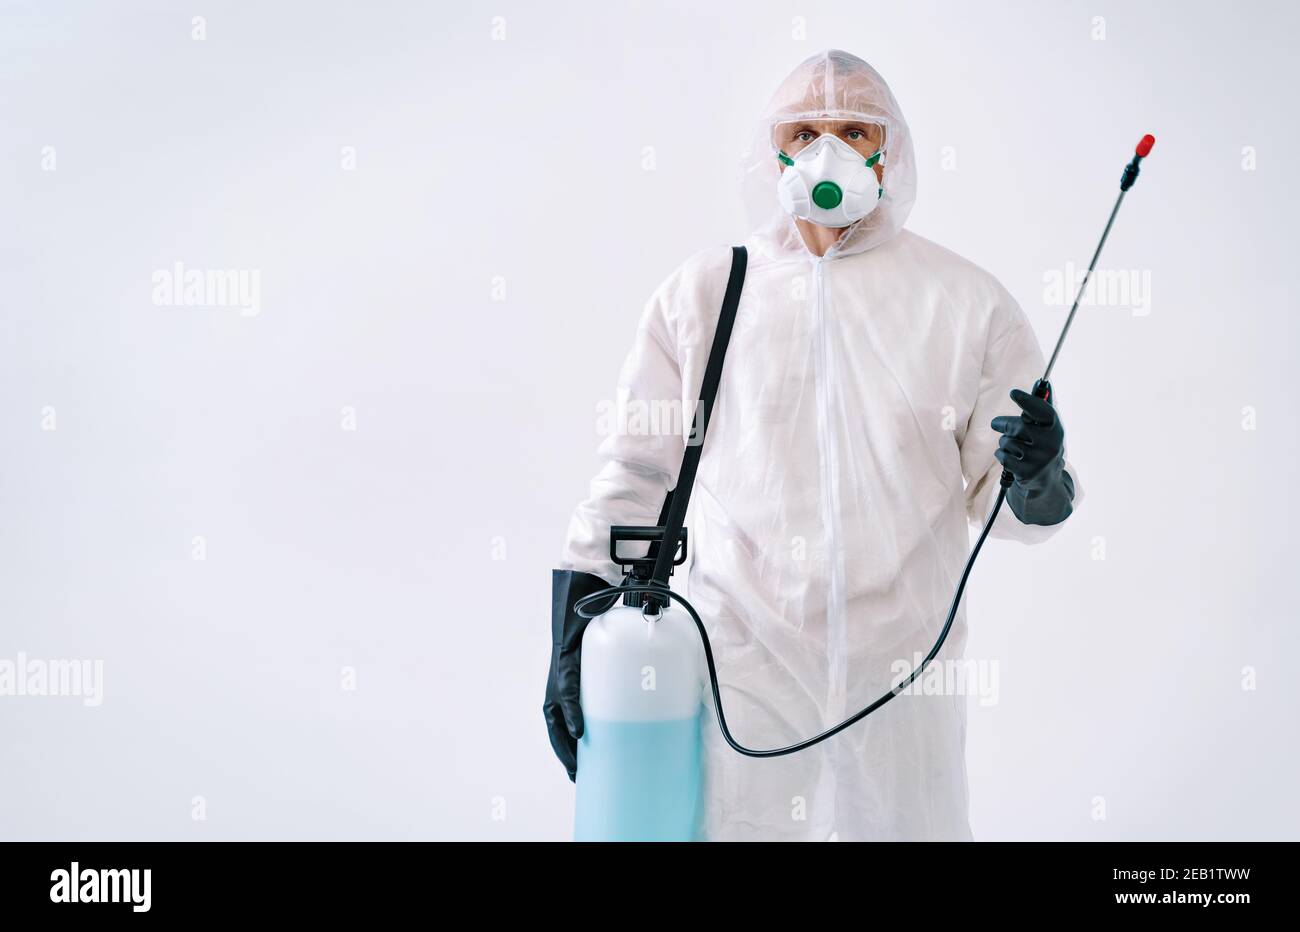 Disinfectant worker in protective suit making disinfection, to control an outbreak of virus Stock Photo